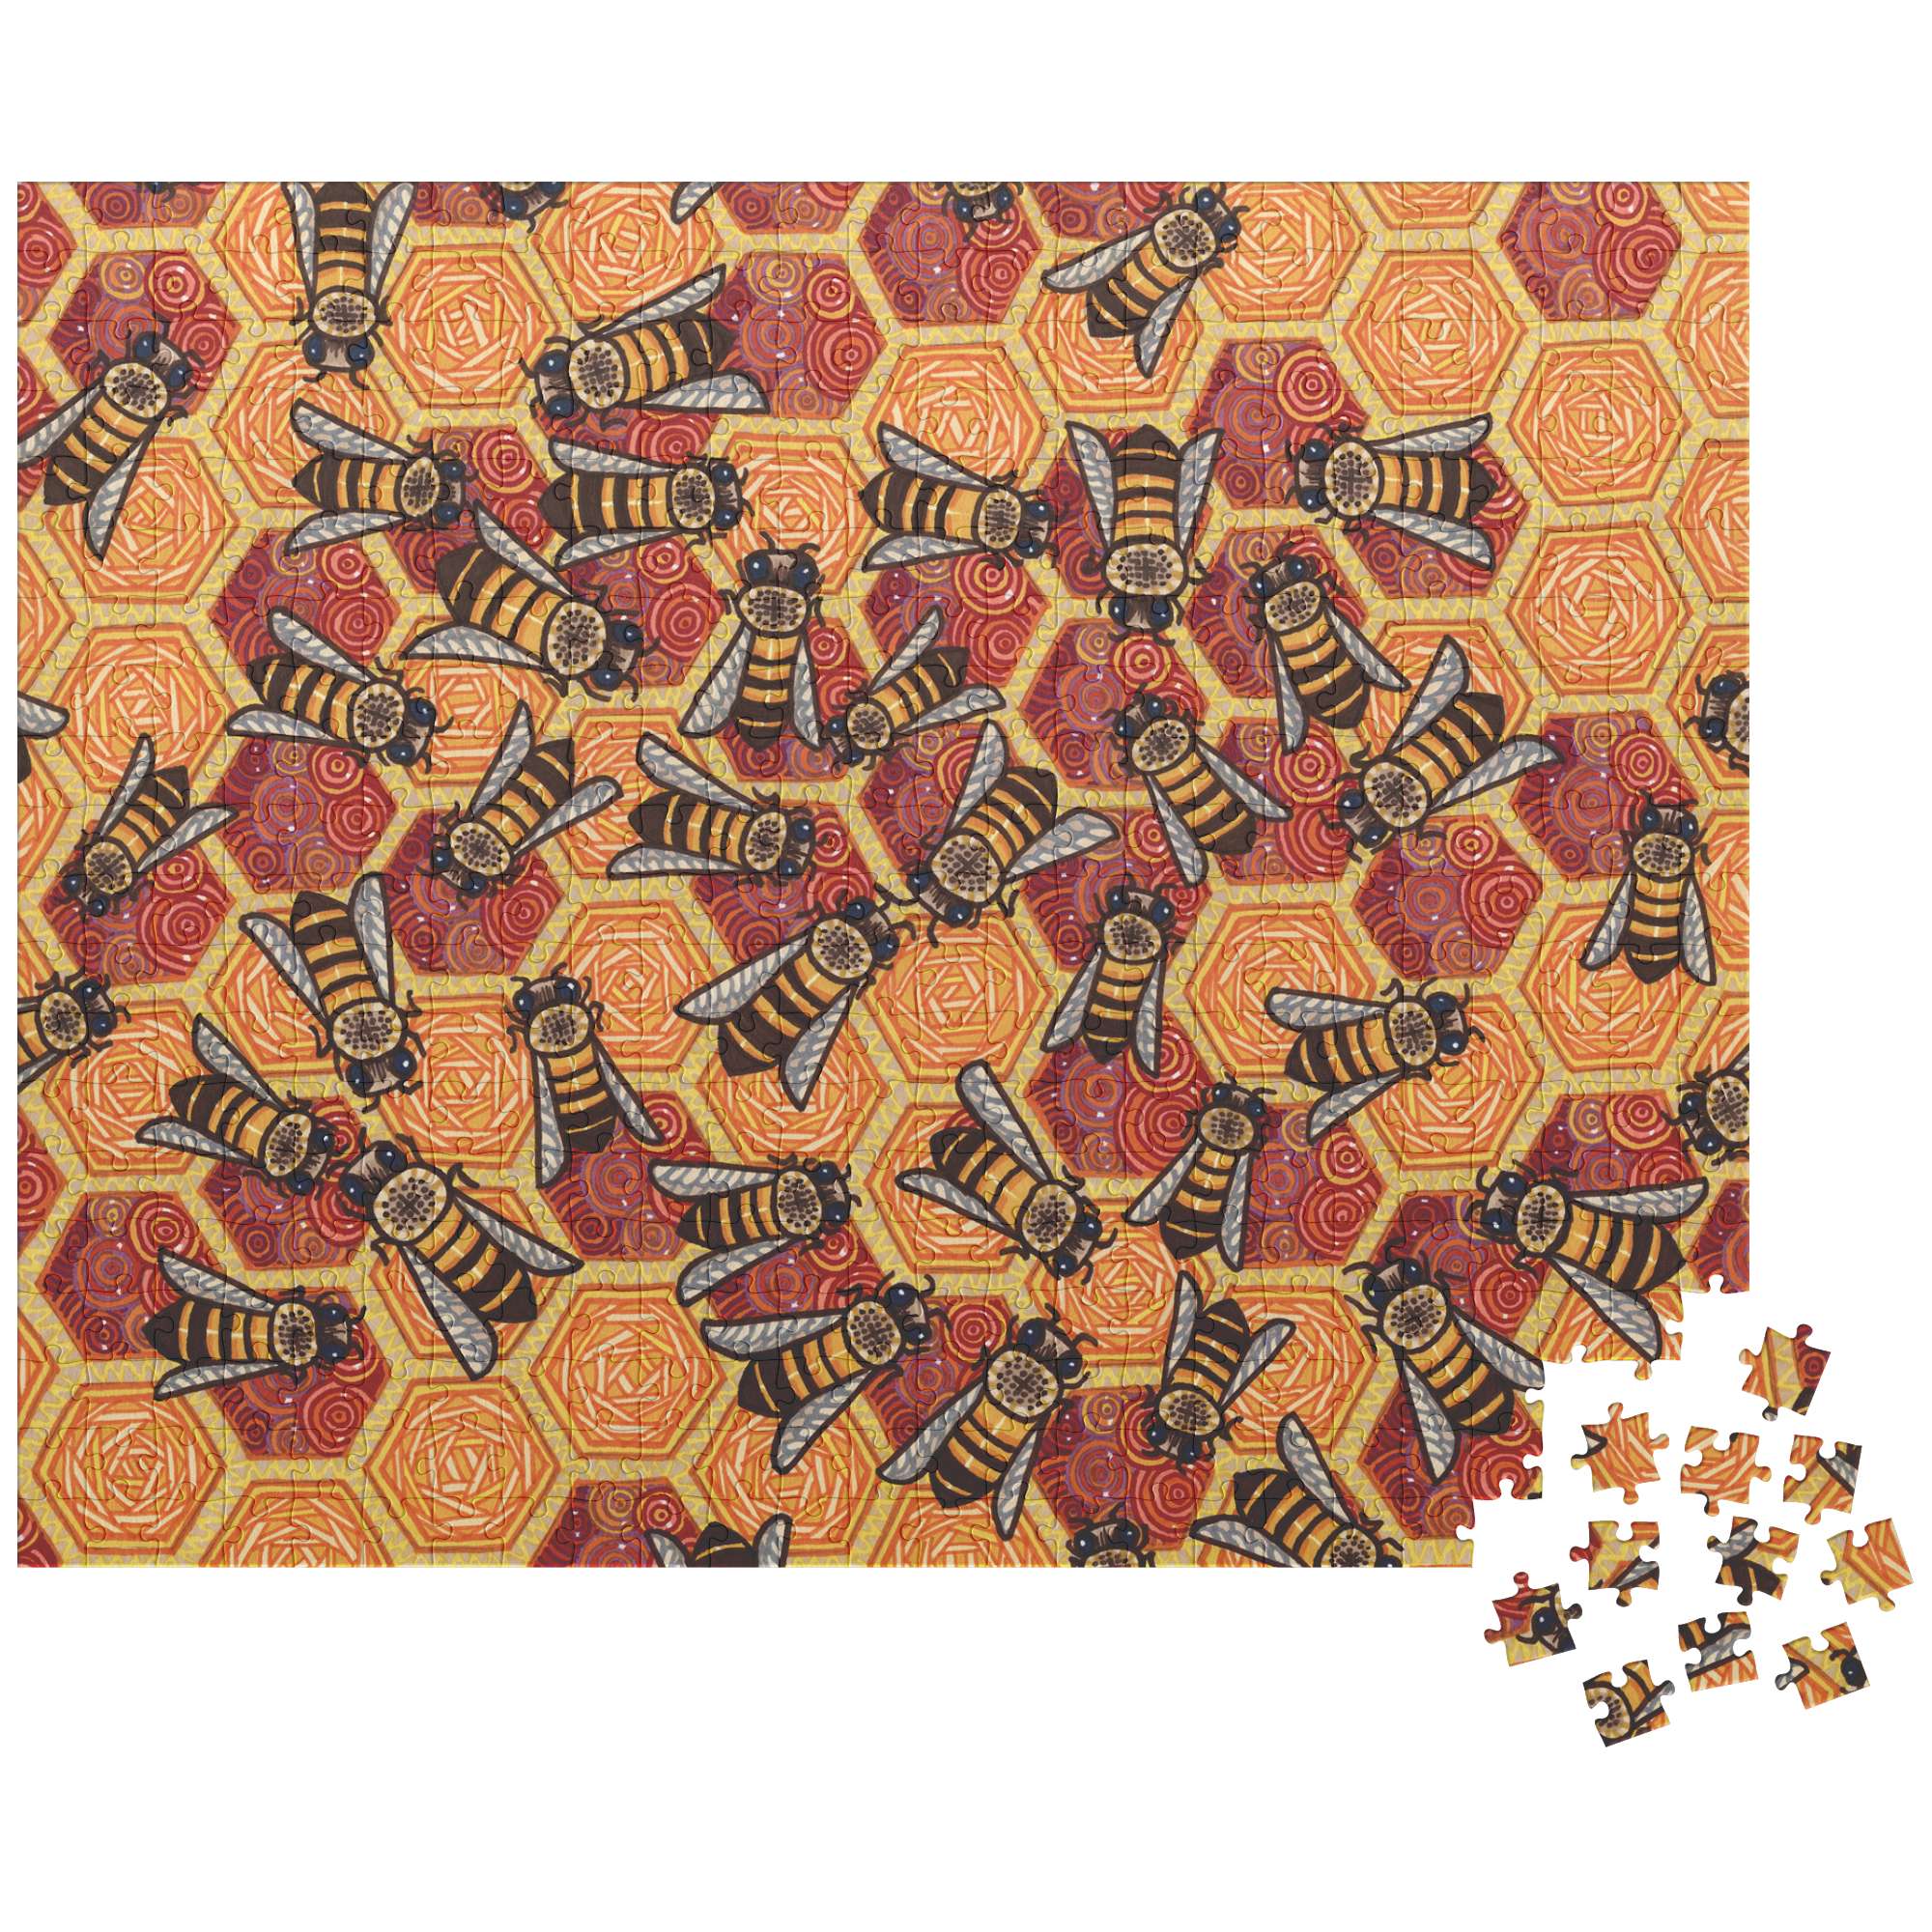 A vibrant jigsaw puzzle featuring repeated motifs of bees on a hexagonal, honeycomb red and orange background.